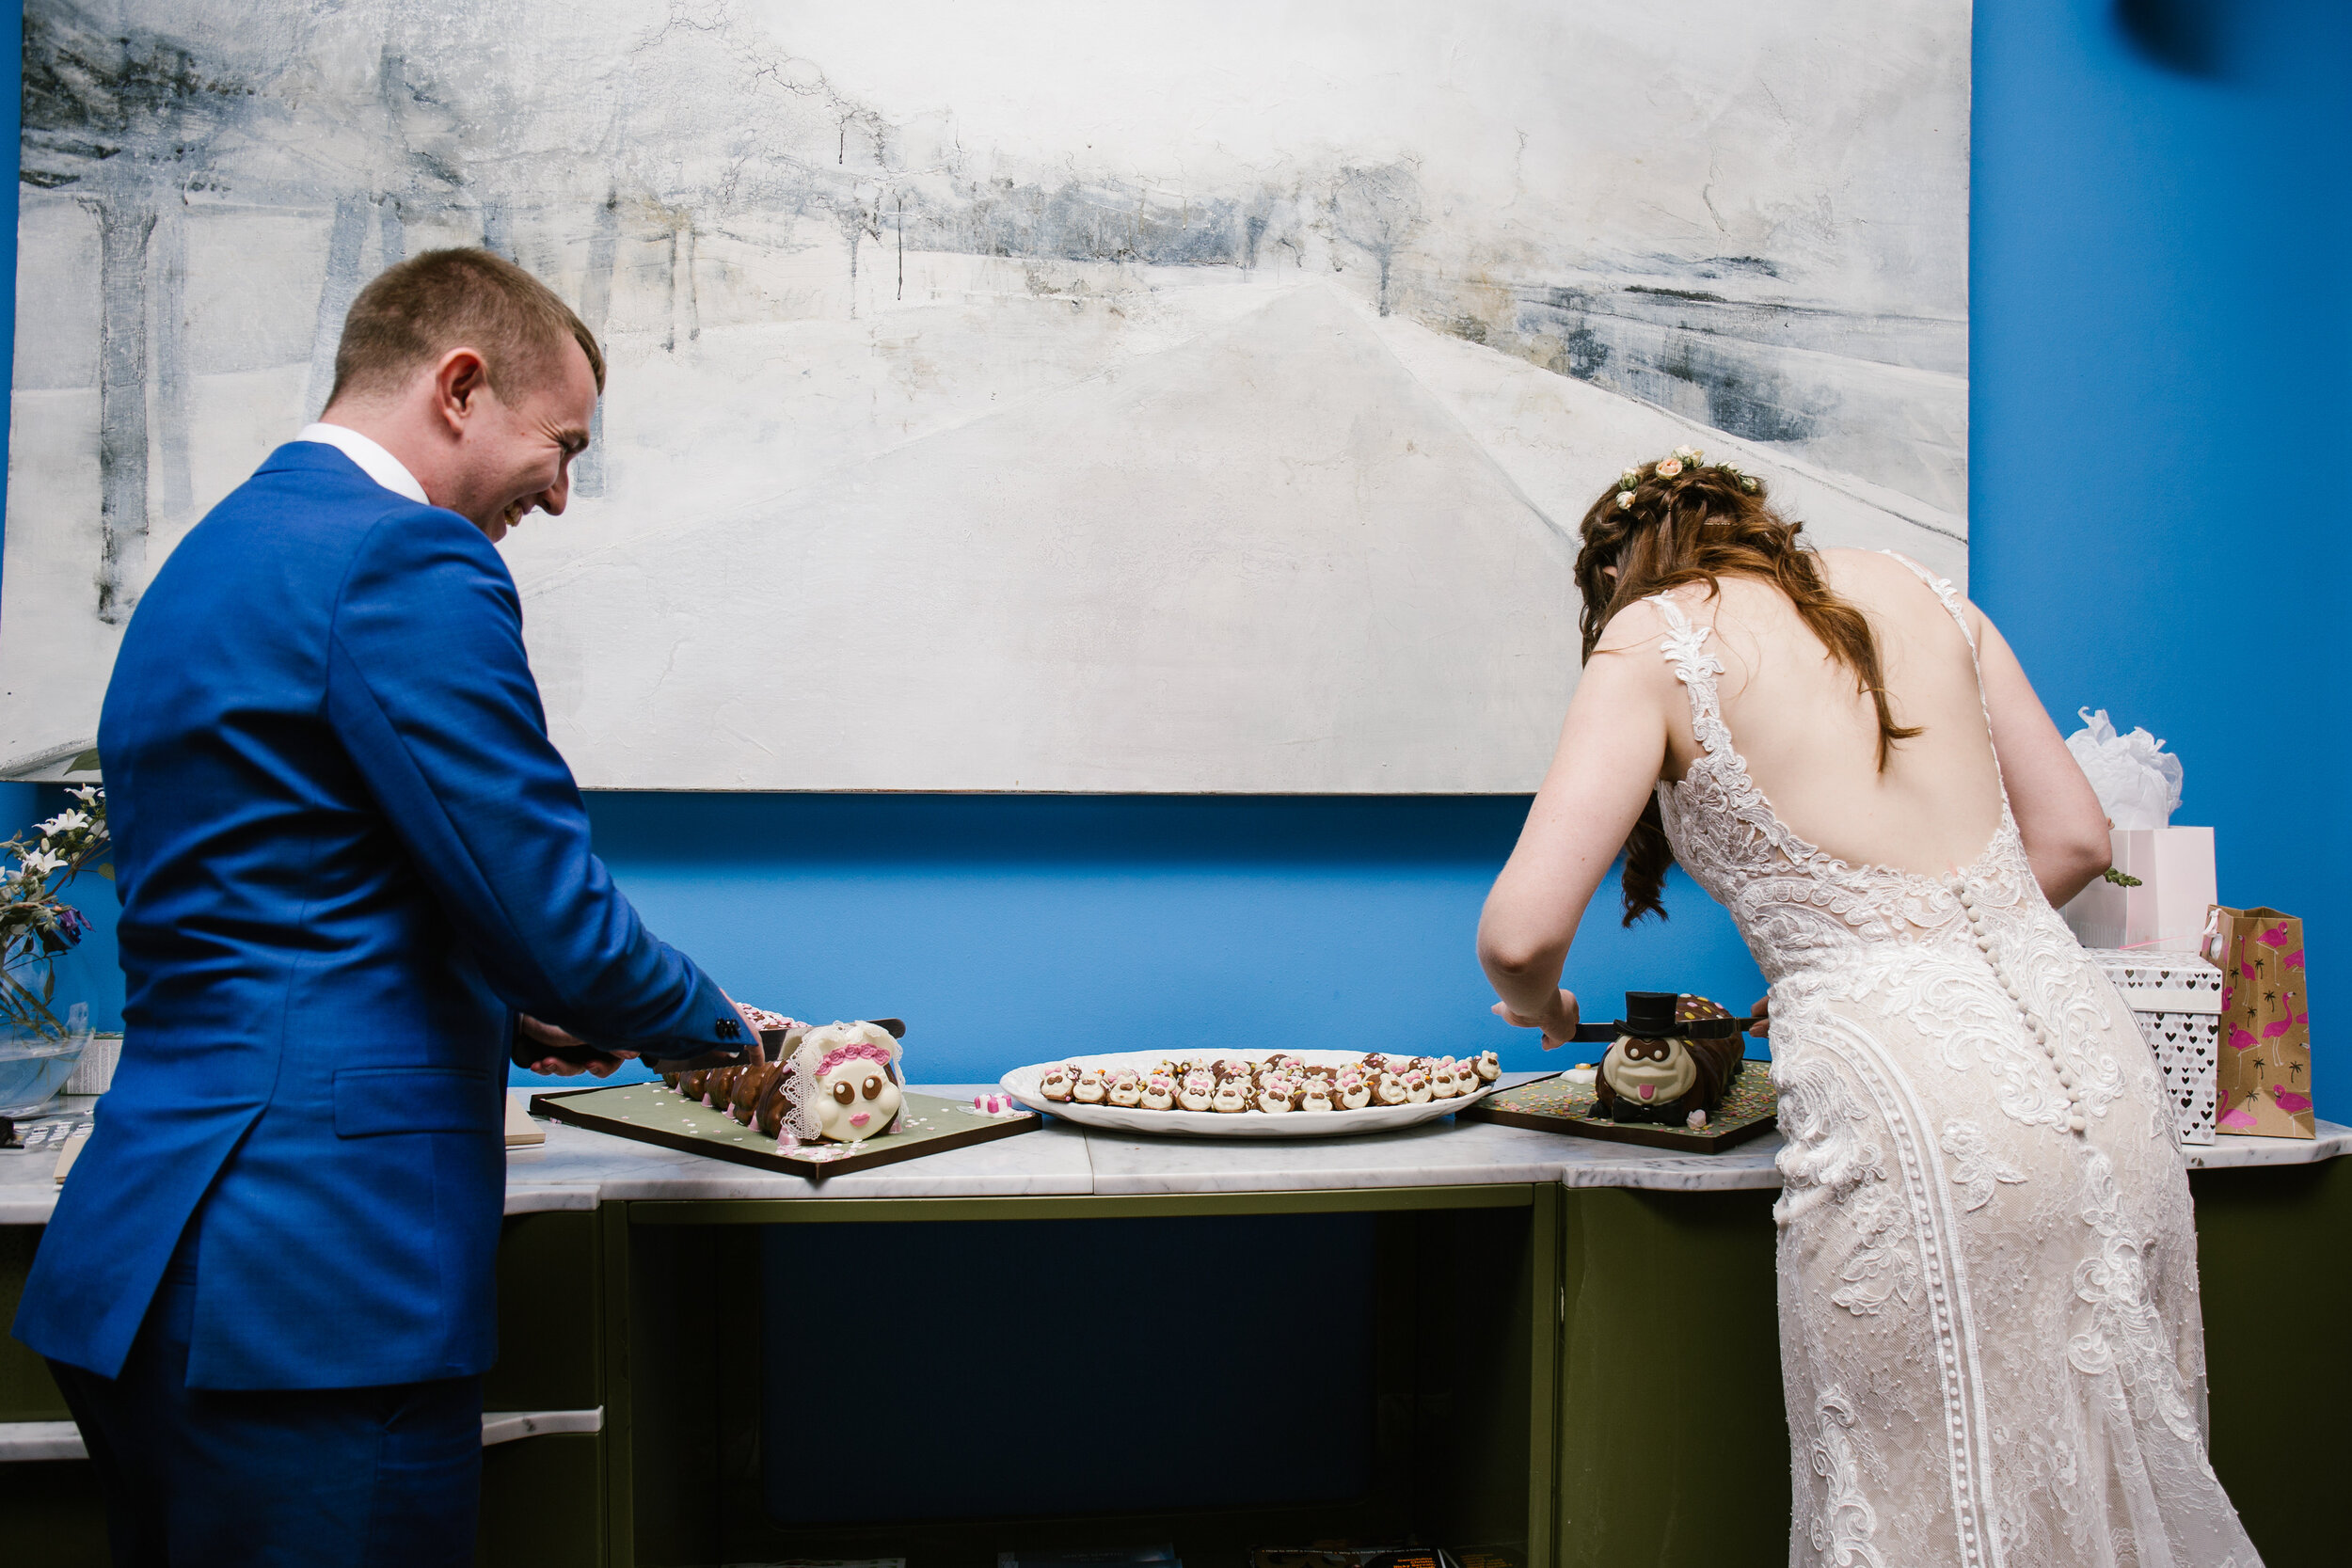 fun photo of the bride and groom cutting their wedding caterpiller cake 